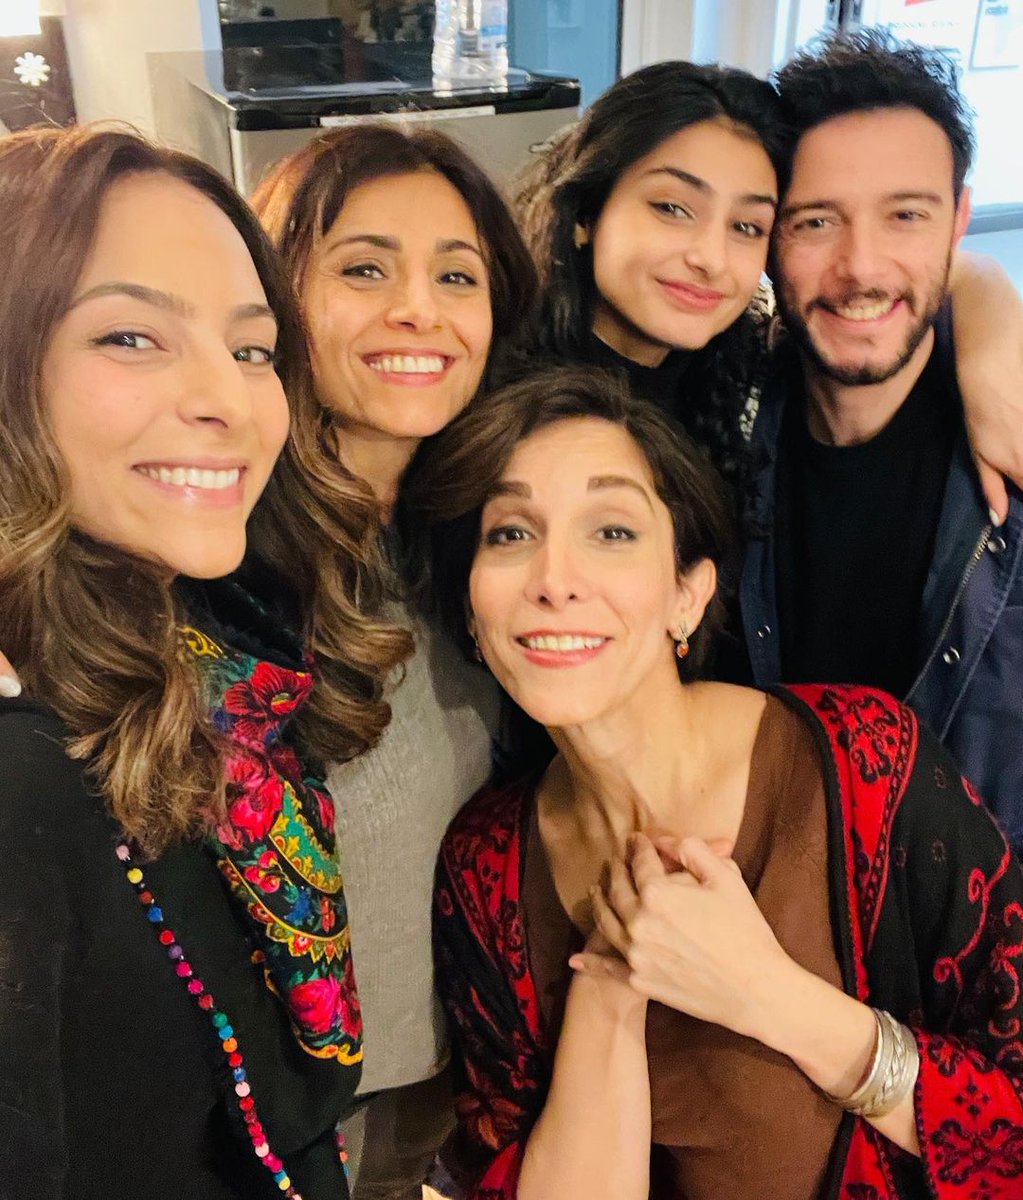 📸 | Tala Ashe's atlantictheater Insta take over

'it is over now. thanks for hanging with us today. come see ENGLISH before March 13th 💫💫💫 #EnglishATC #instatakeover'